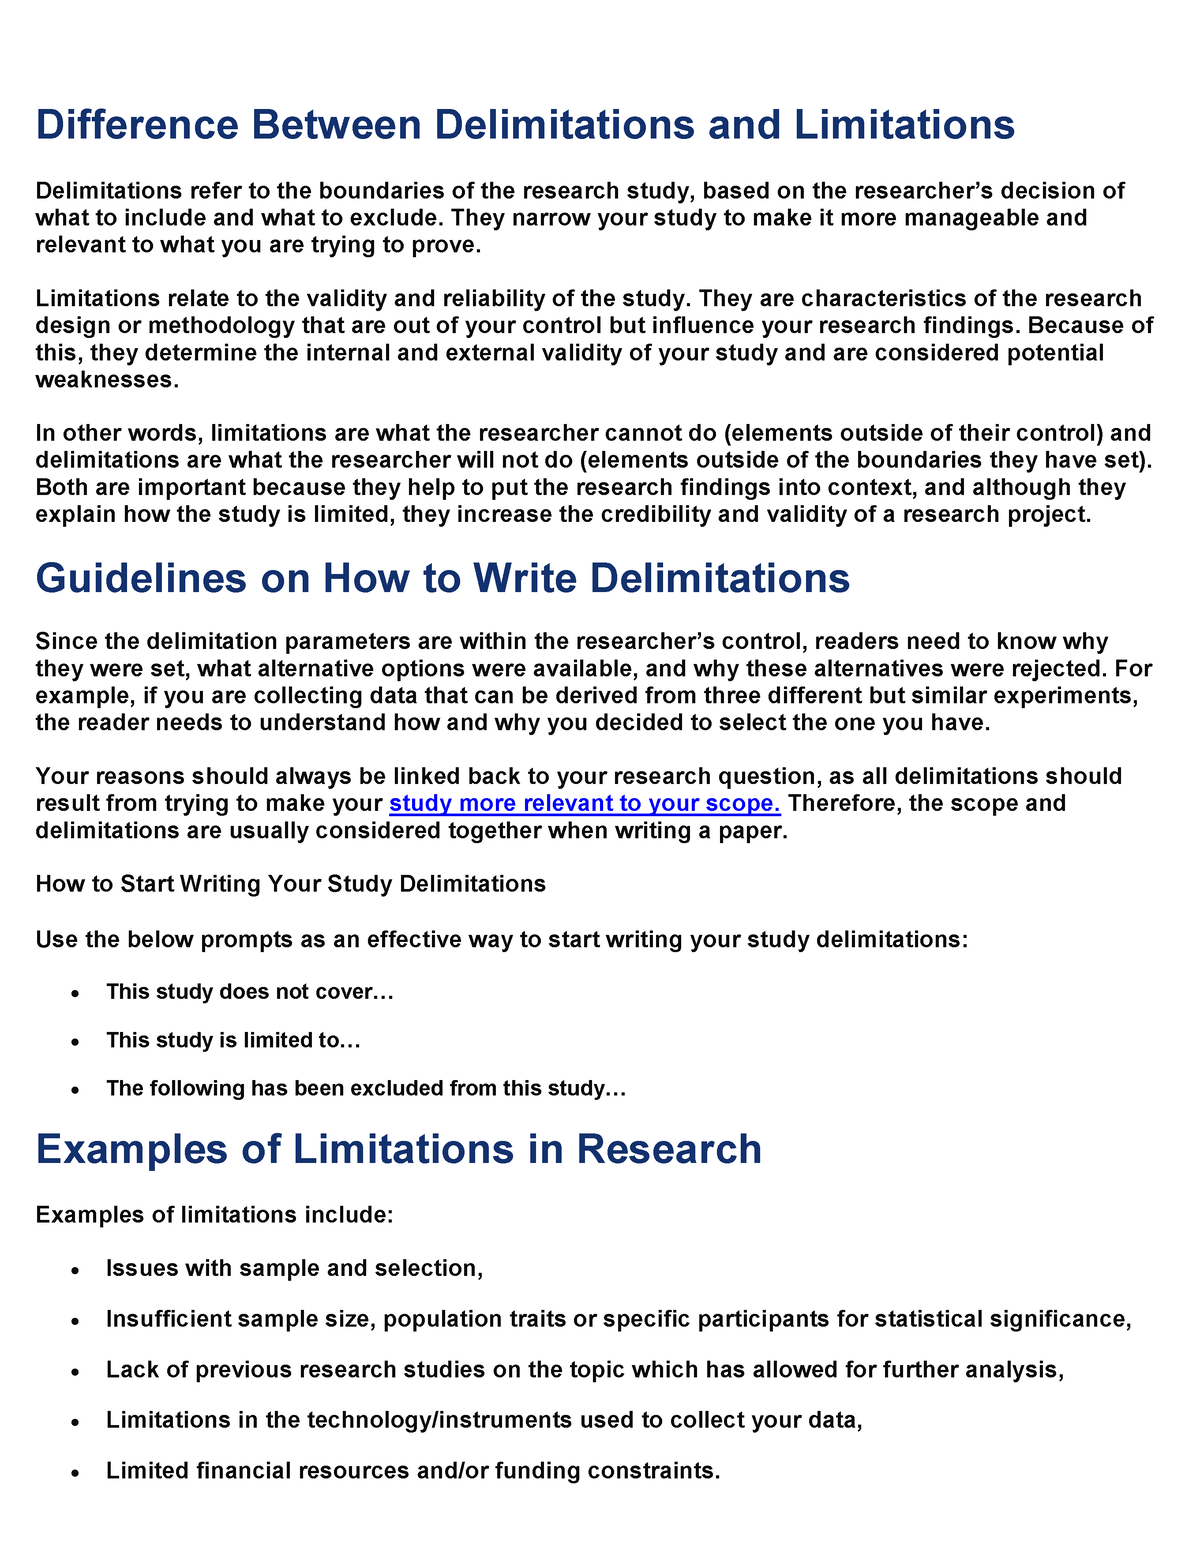 comparison between limitation and delimitation in research